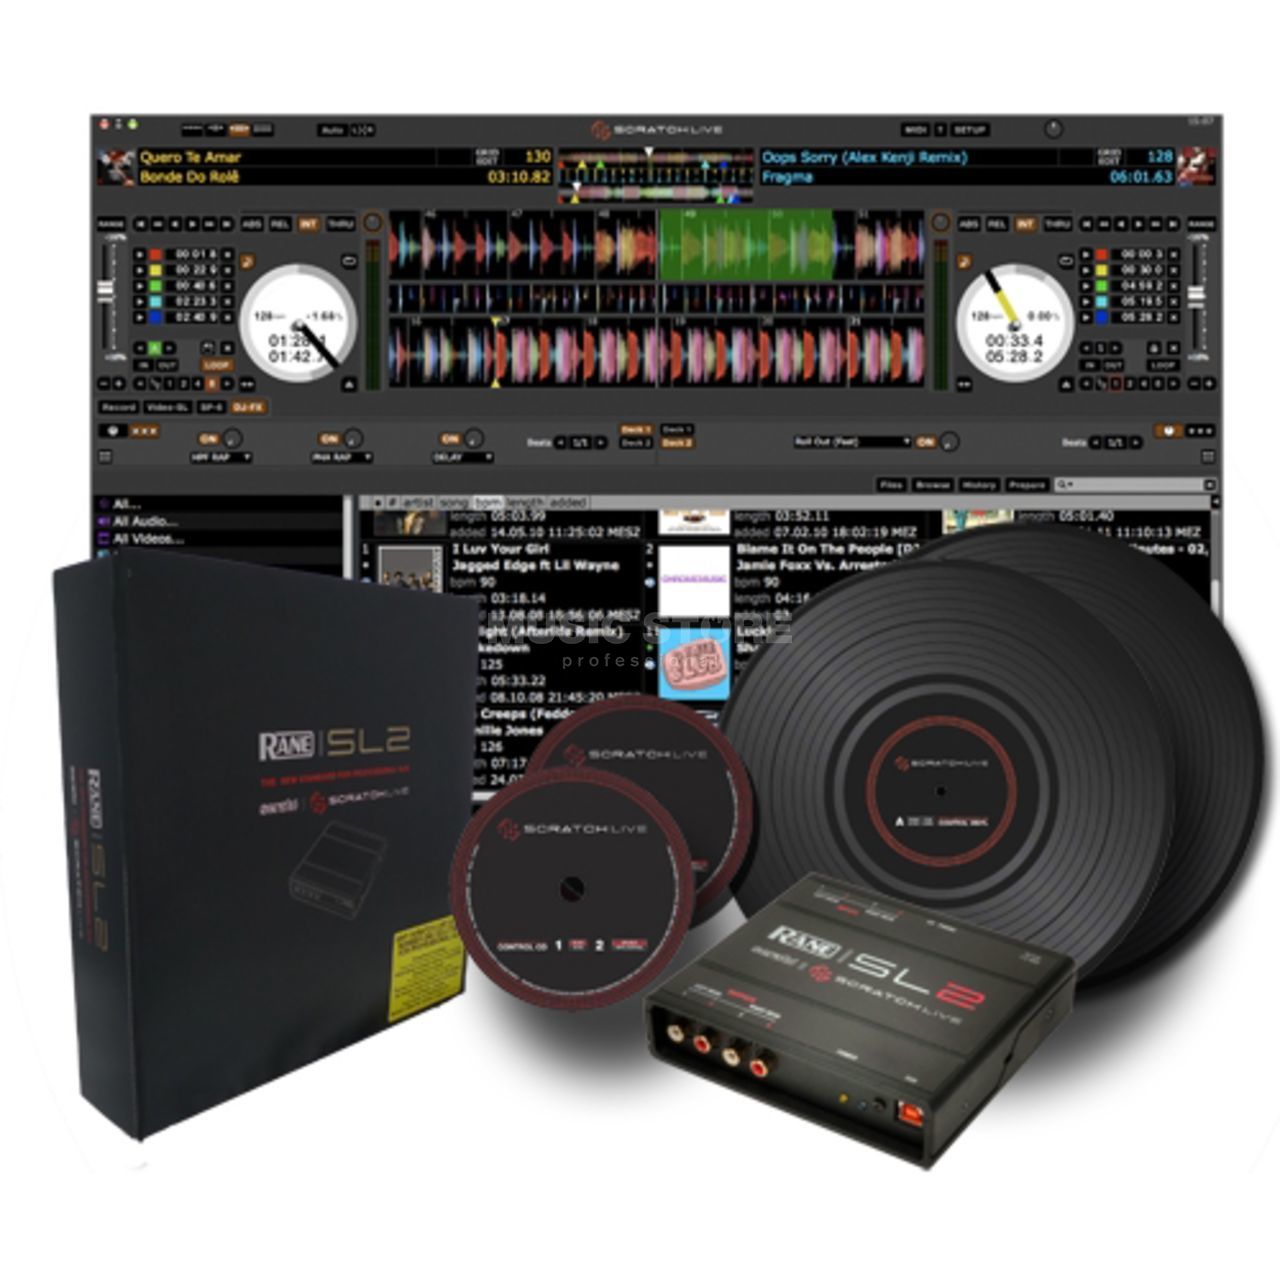 Serato scratch live drivers windows 7 for free